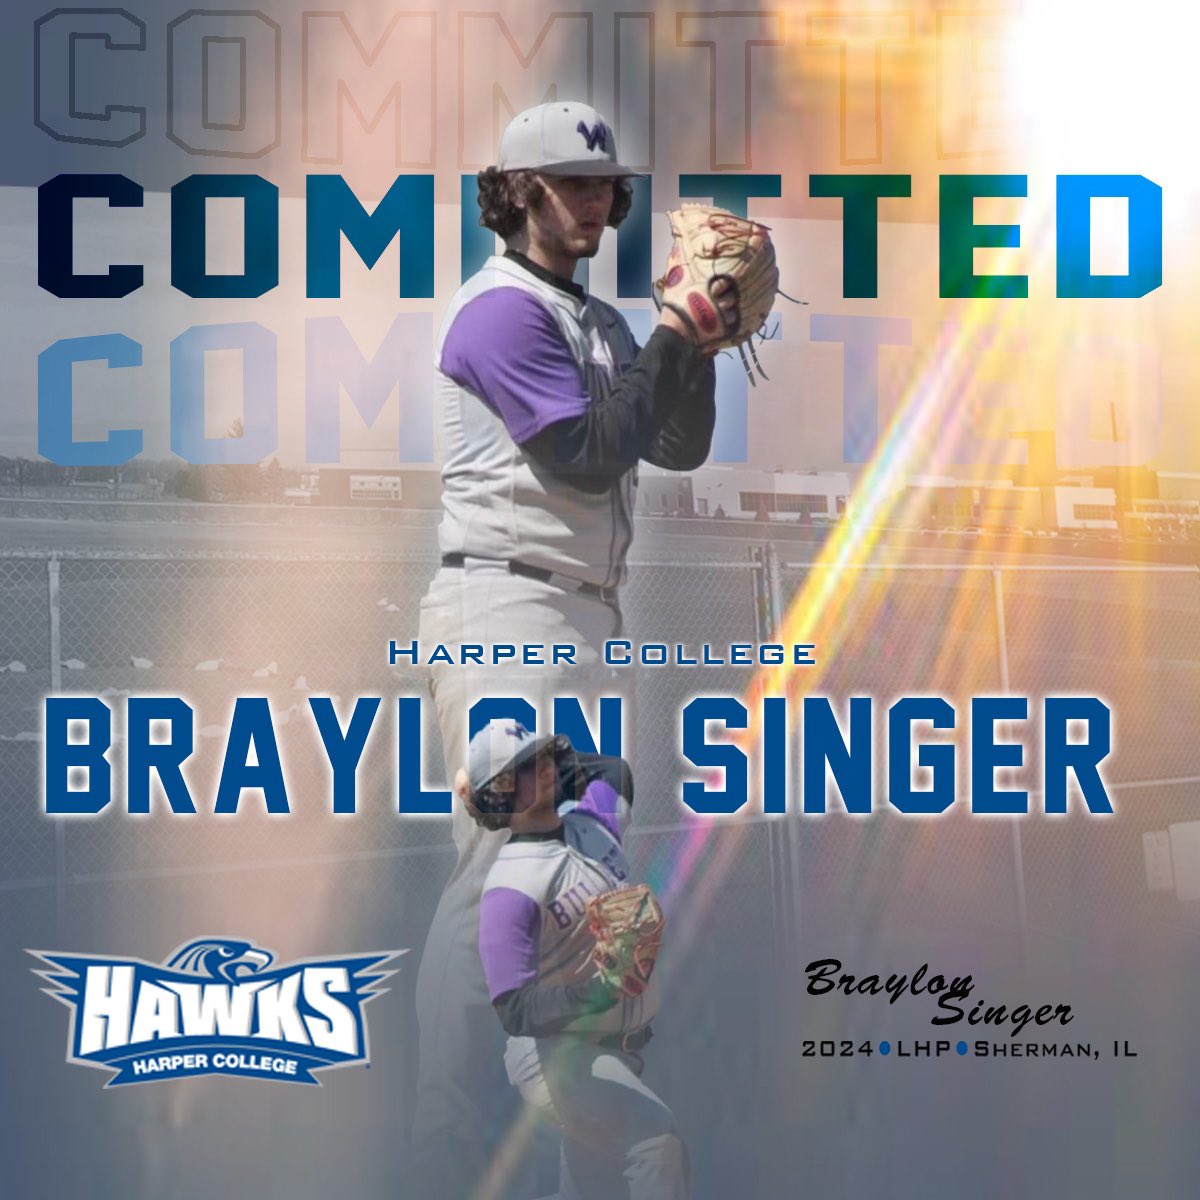 I am excited to announce my commitment to Harper College, continuing my academic and athletic career. I want to thank my family for the countless years of support and sacrifices. I would also like to thank my teammates and coaches for making me the player I am today. Thank you